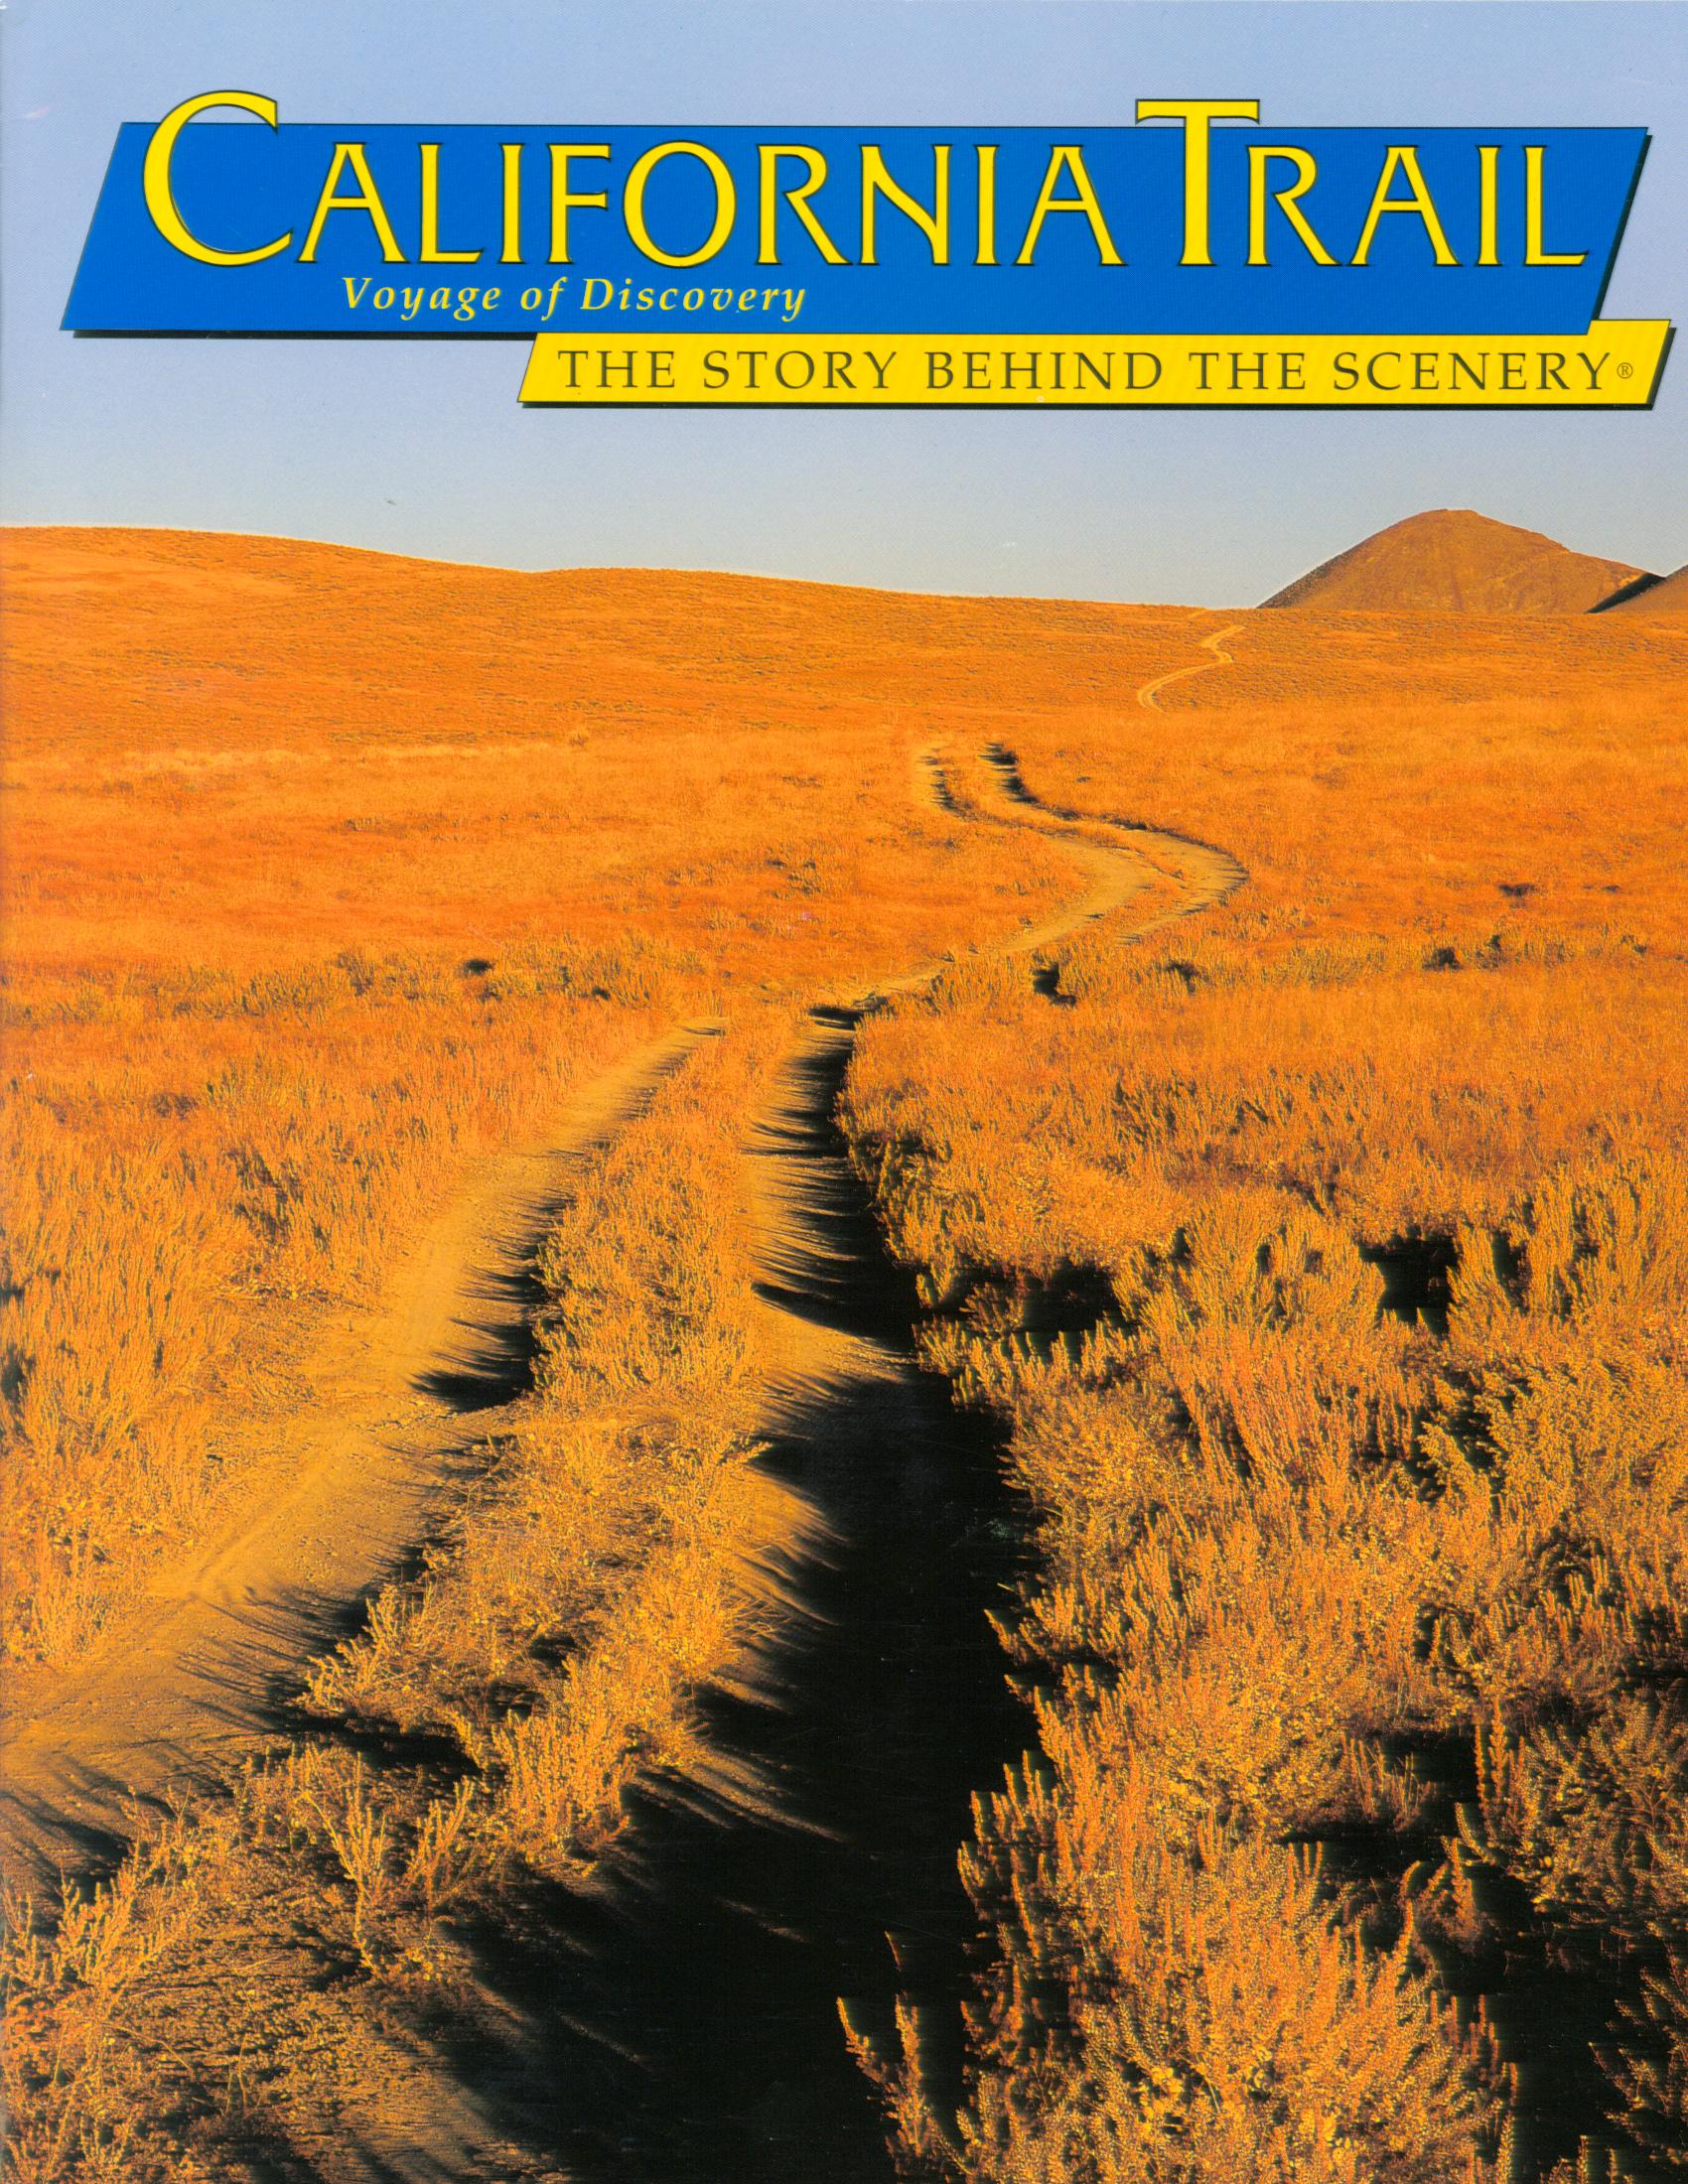 CALIFORNIA TRAIL: the story behind the scenery--voyage of discovery. 